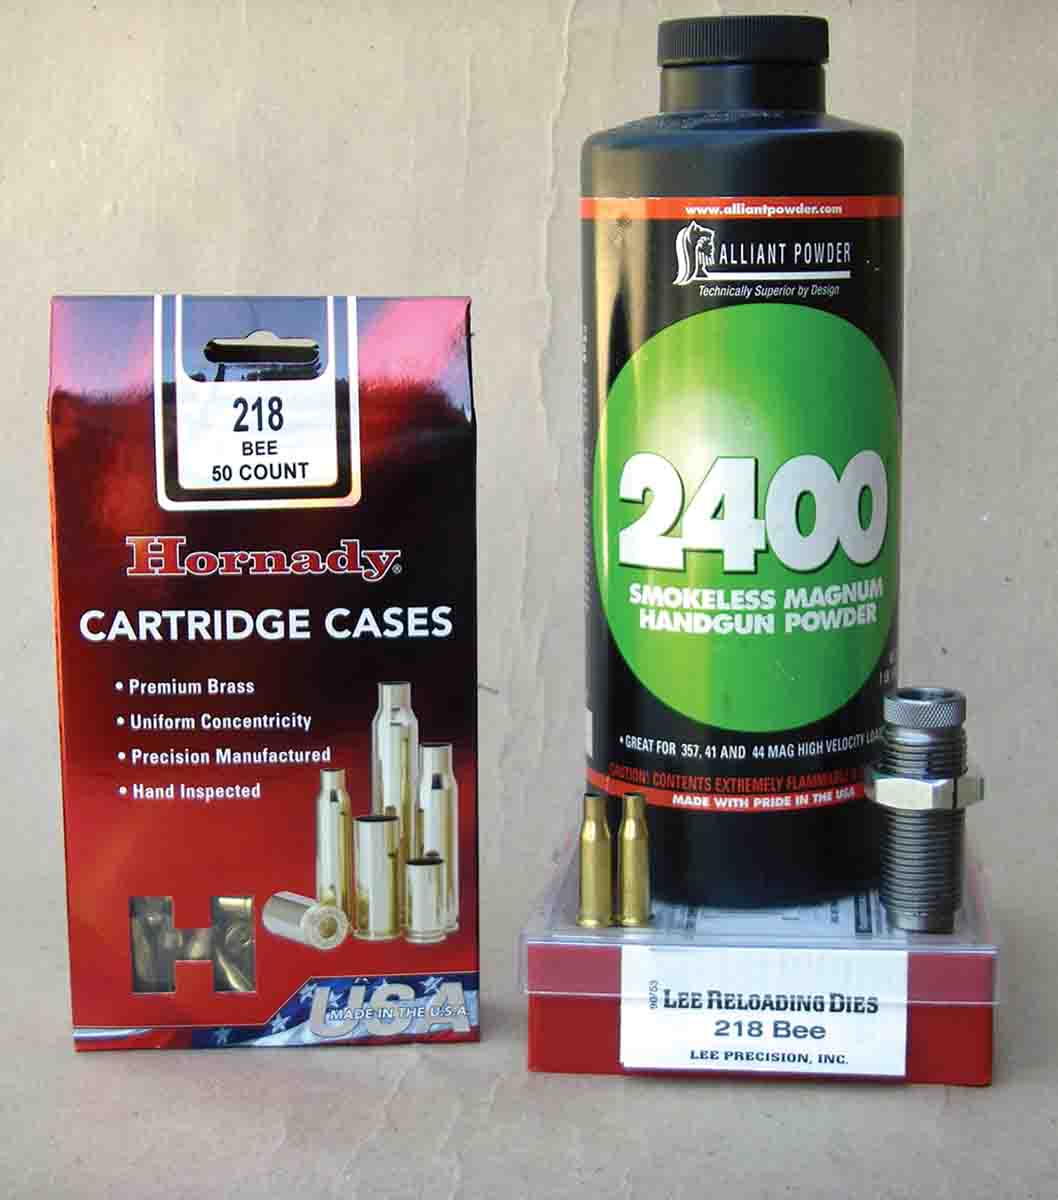 Hornady now offers .218 Bee component brass. Alliant 2400 powder will duplicate factory load performance and accuracy.